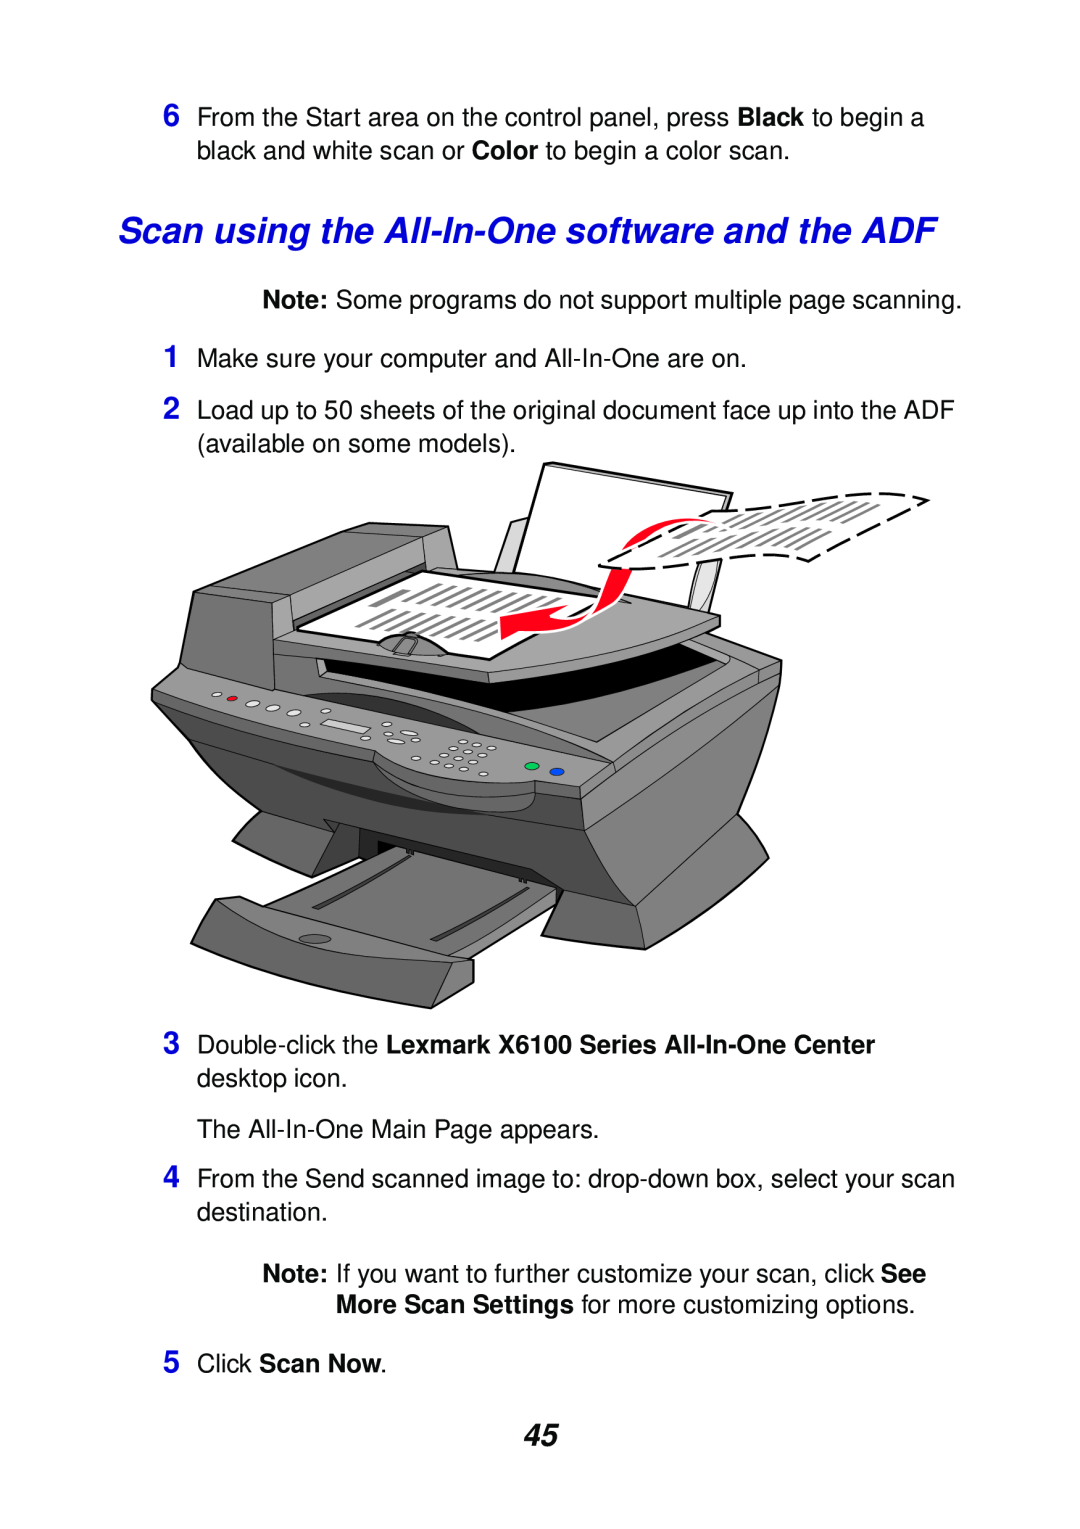 Lexmark X6100 manual Scan using the All-In-Onesoftware and the ADF, 5Click Scan Now 